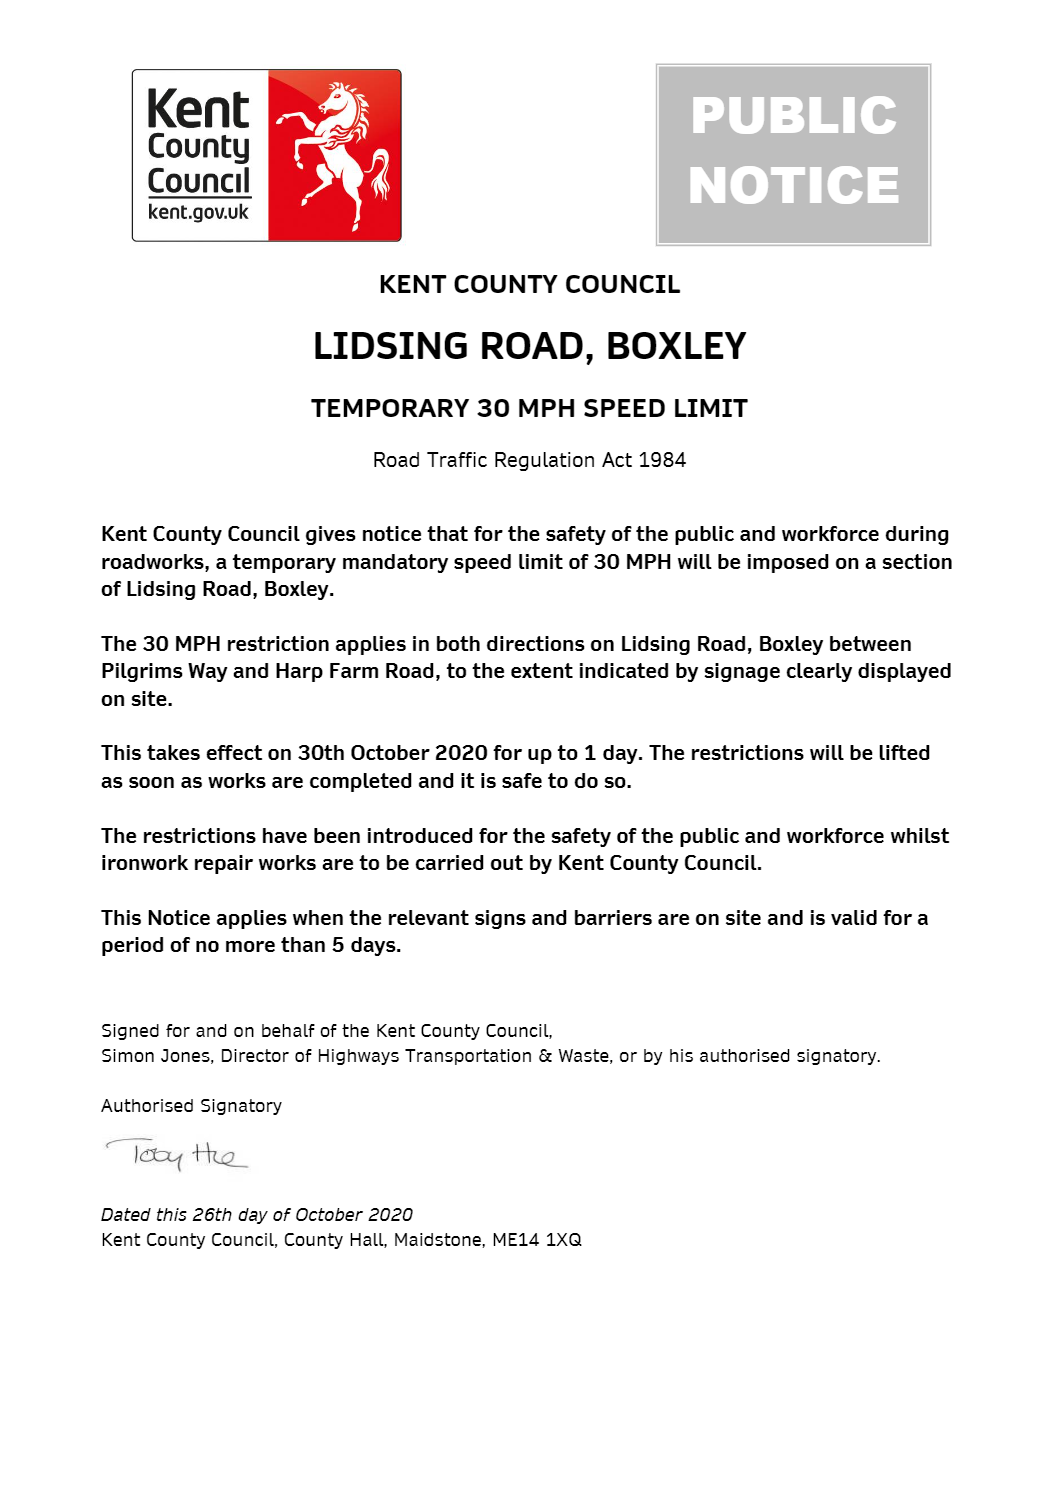 Temporary speed reduction in Lidsing Road